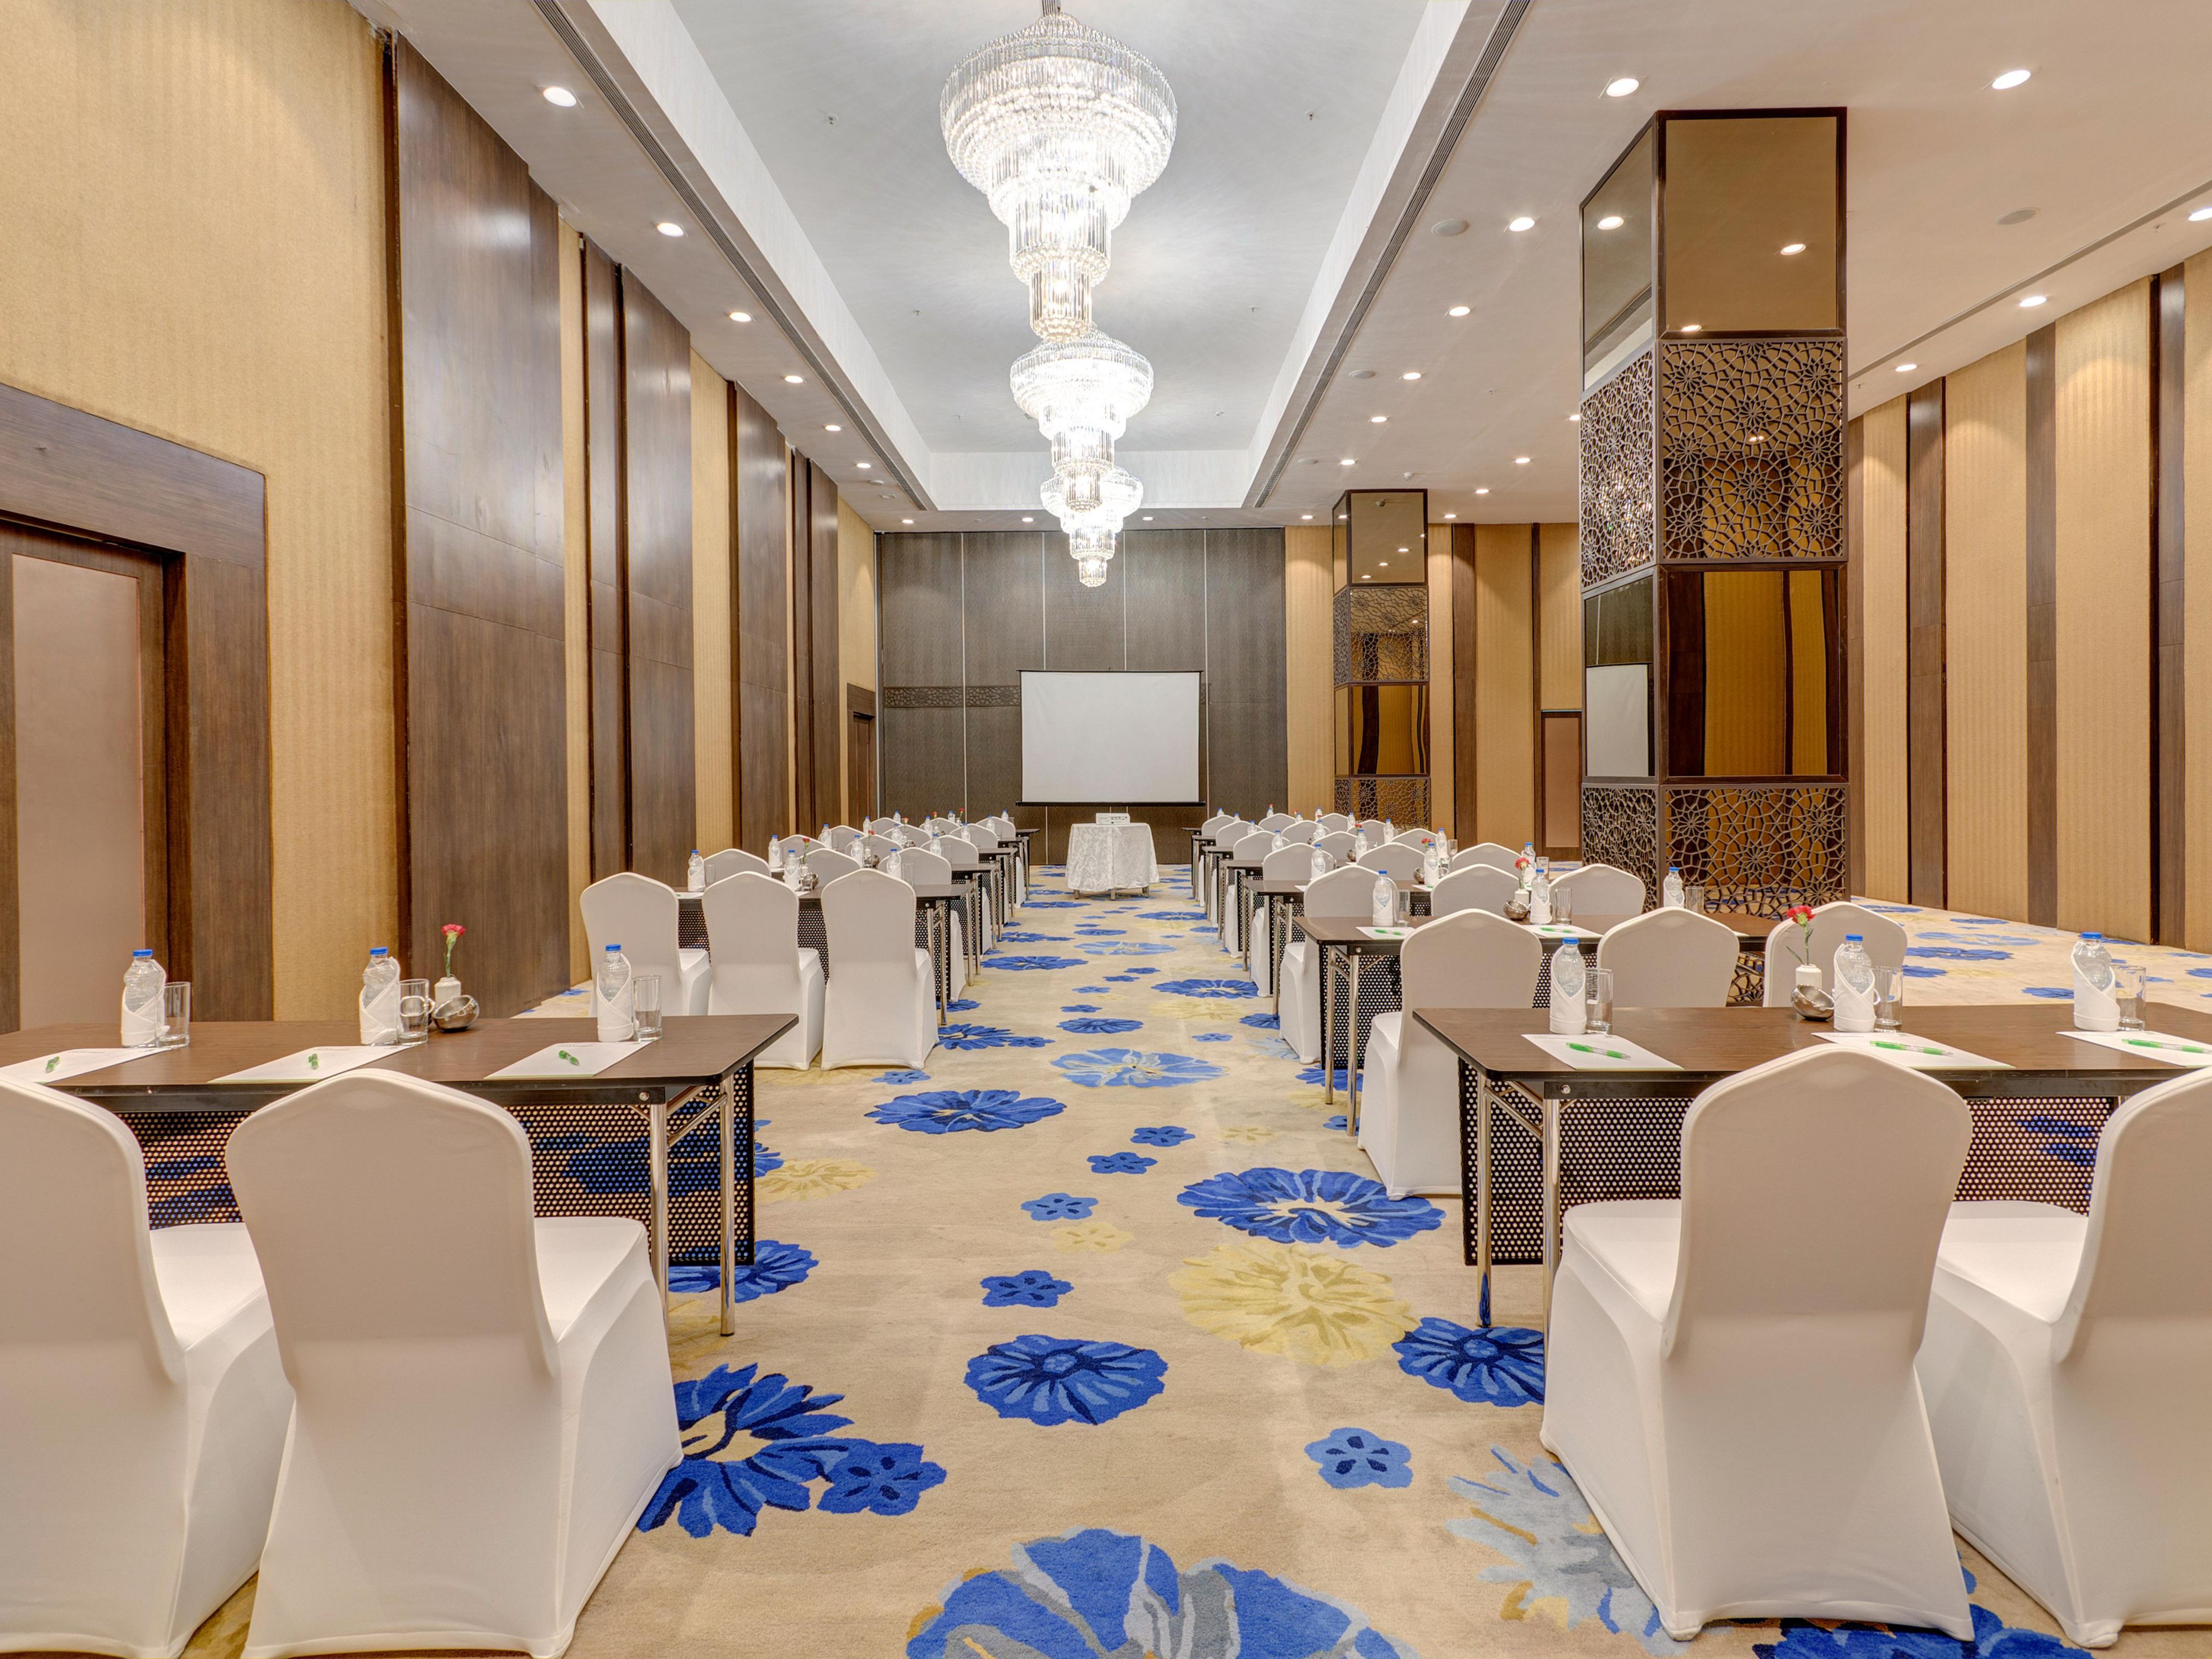 The hotel has a versatile meeting space that can do conferences and meetings from 15 to 600 participants.